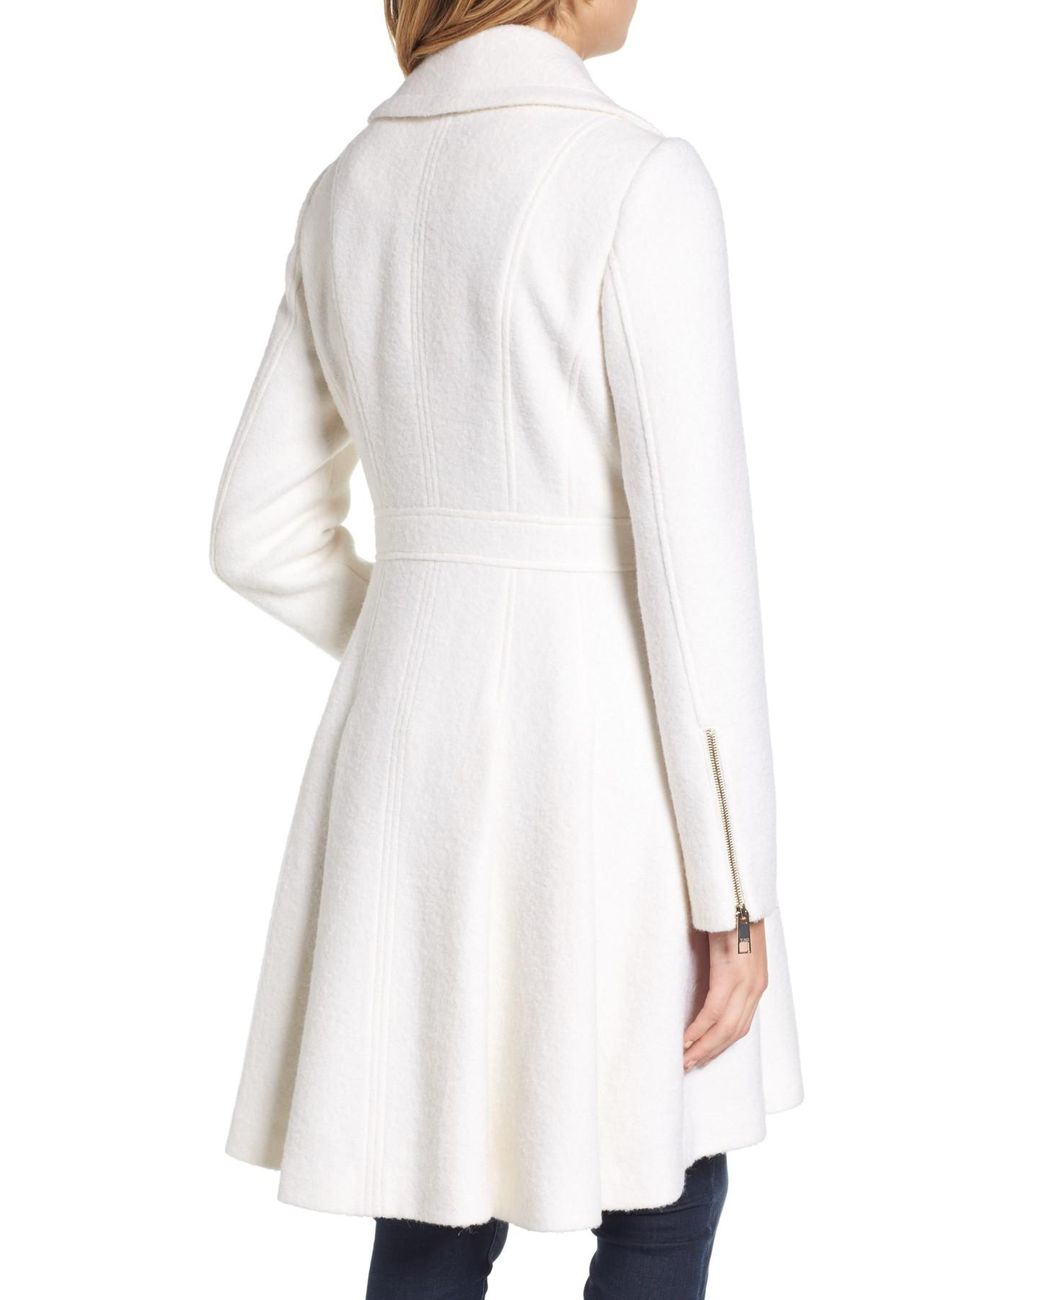 Guess Double Breasted Wool Blend Coat in White | Lyst